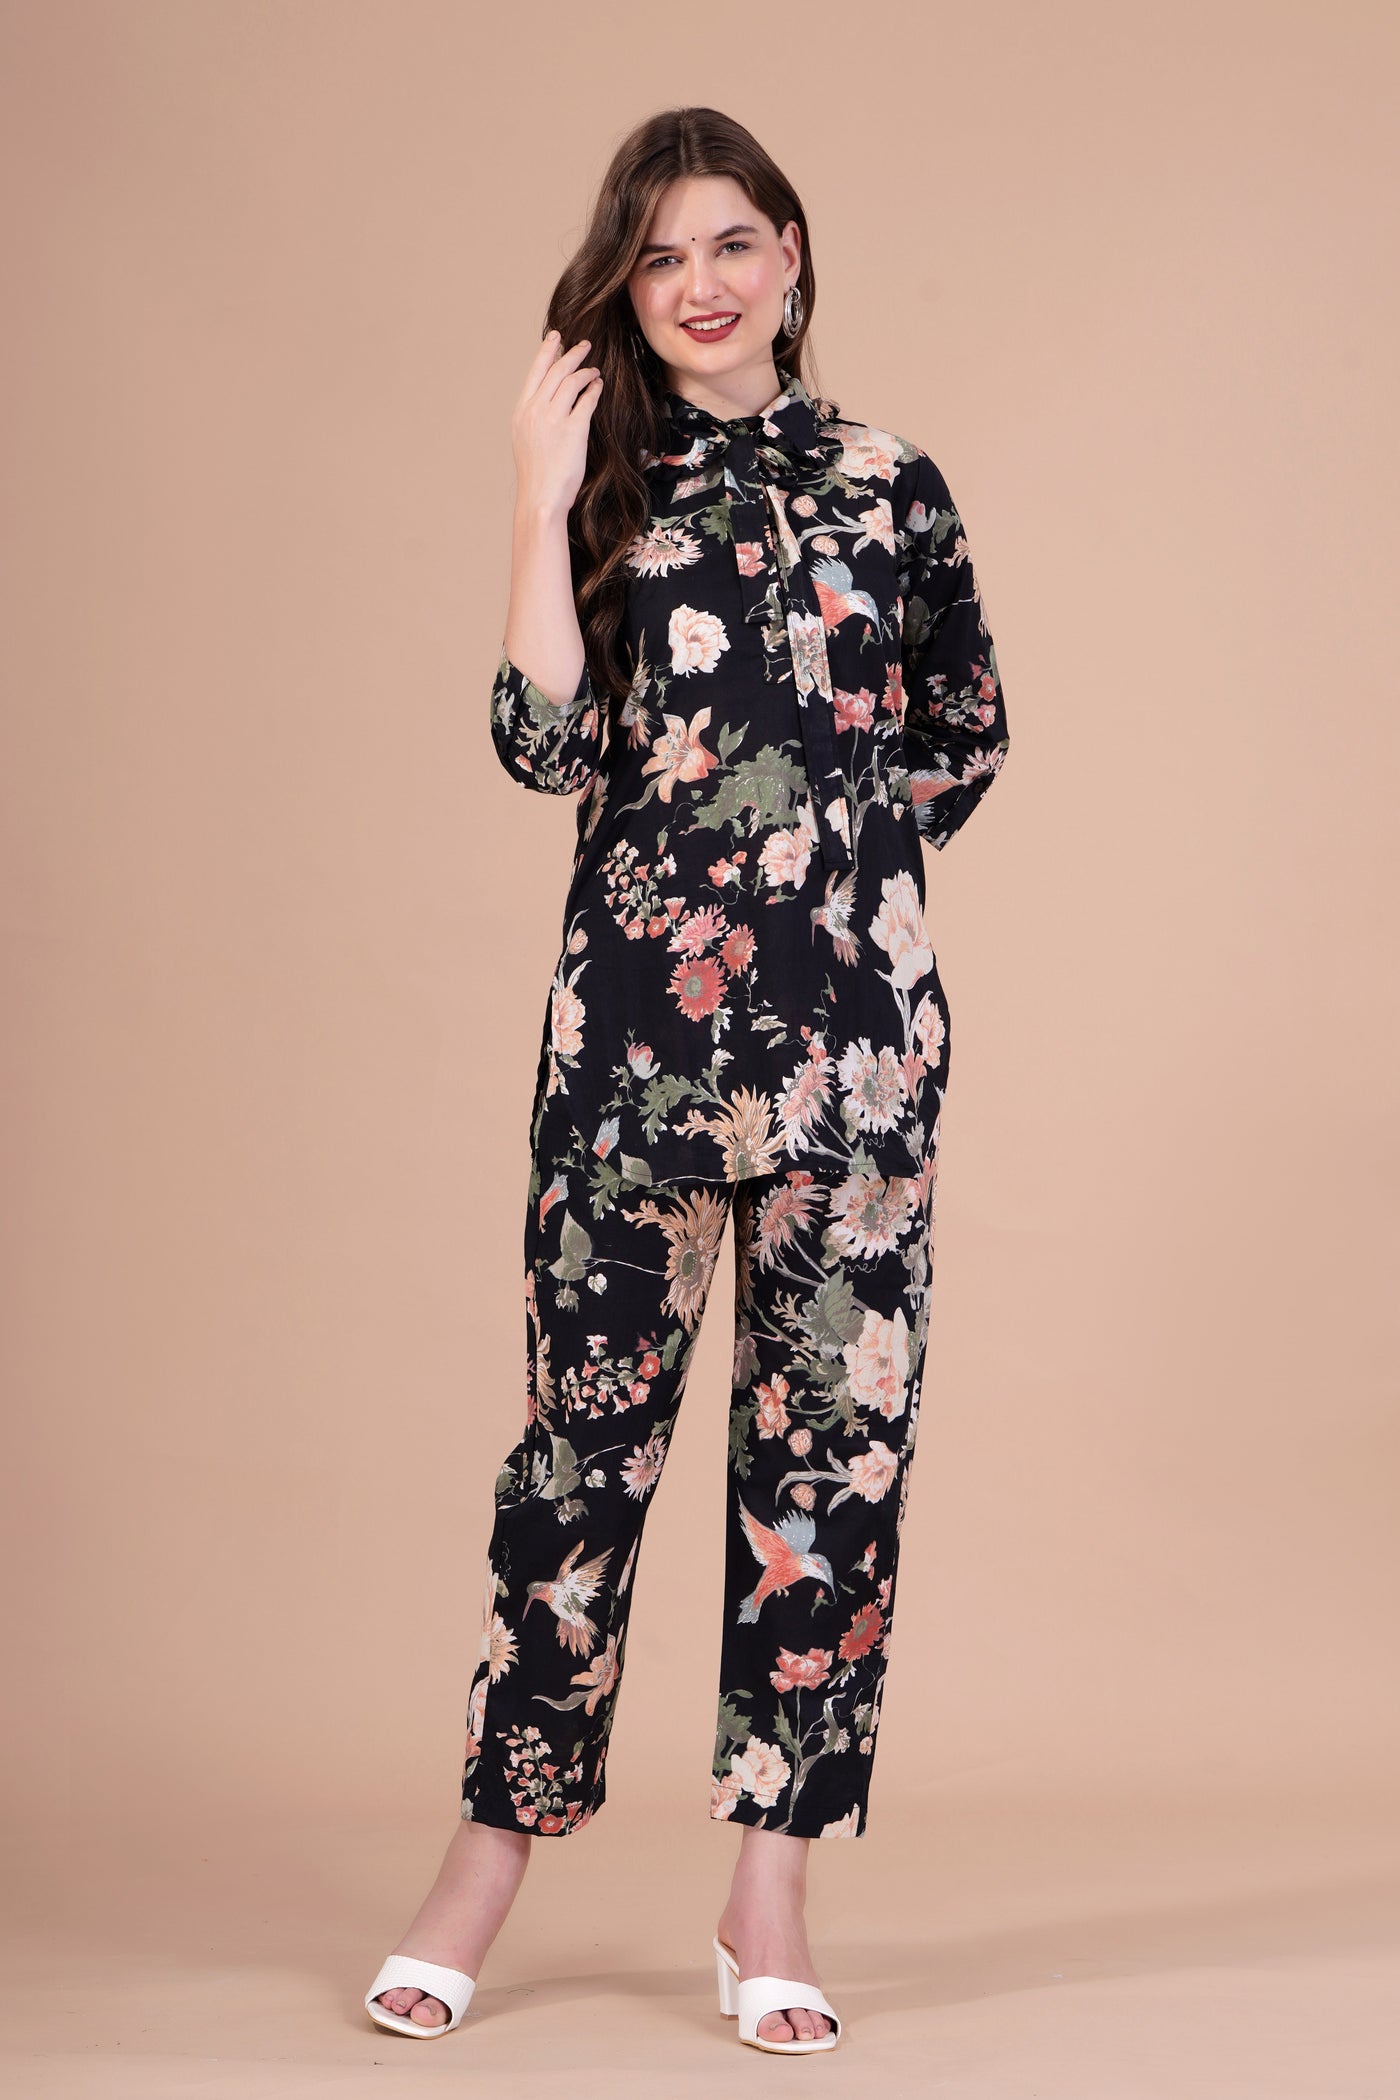 Zoya black flower printed cotton co-ord set with collar neck and belt